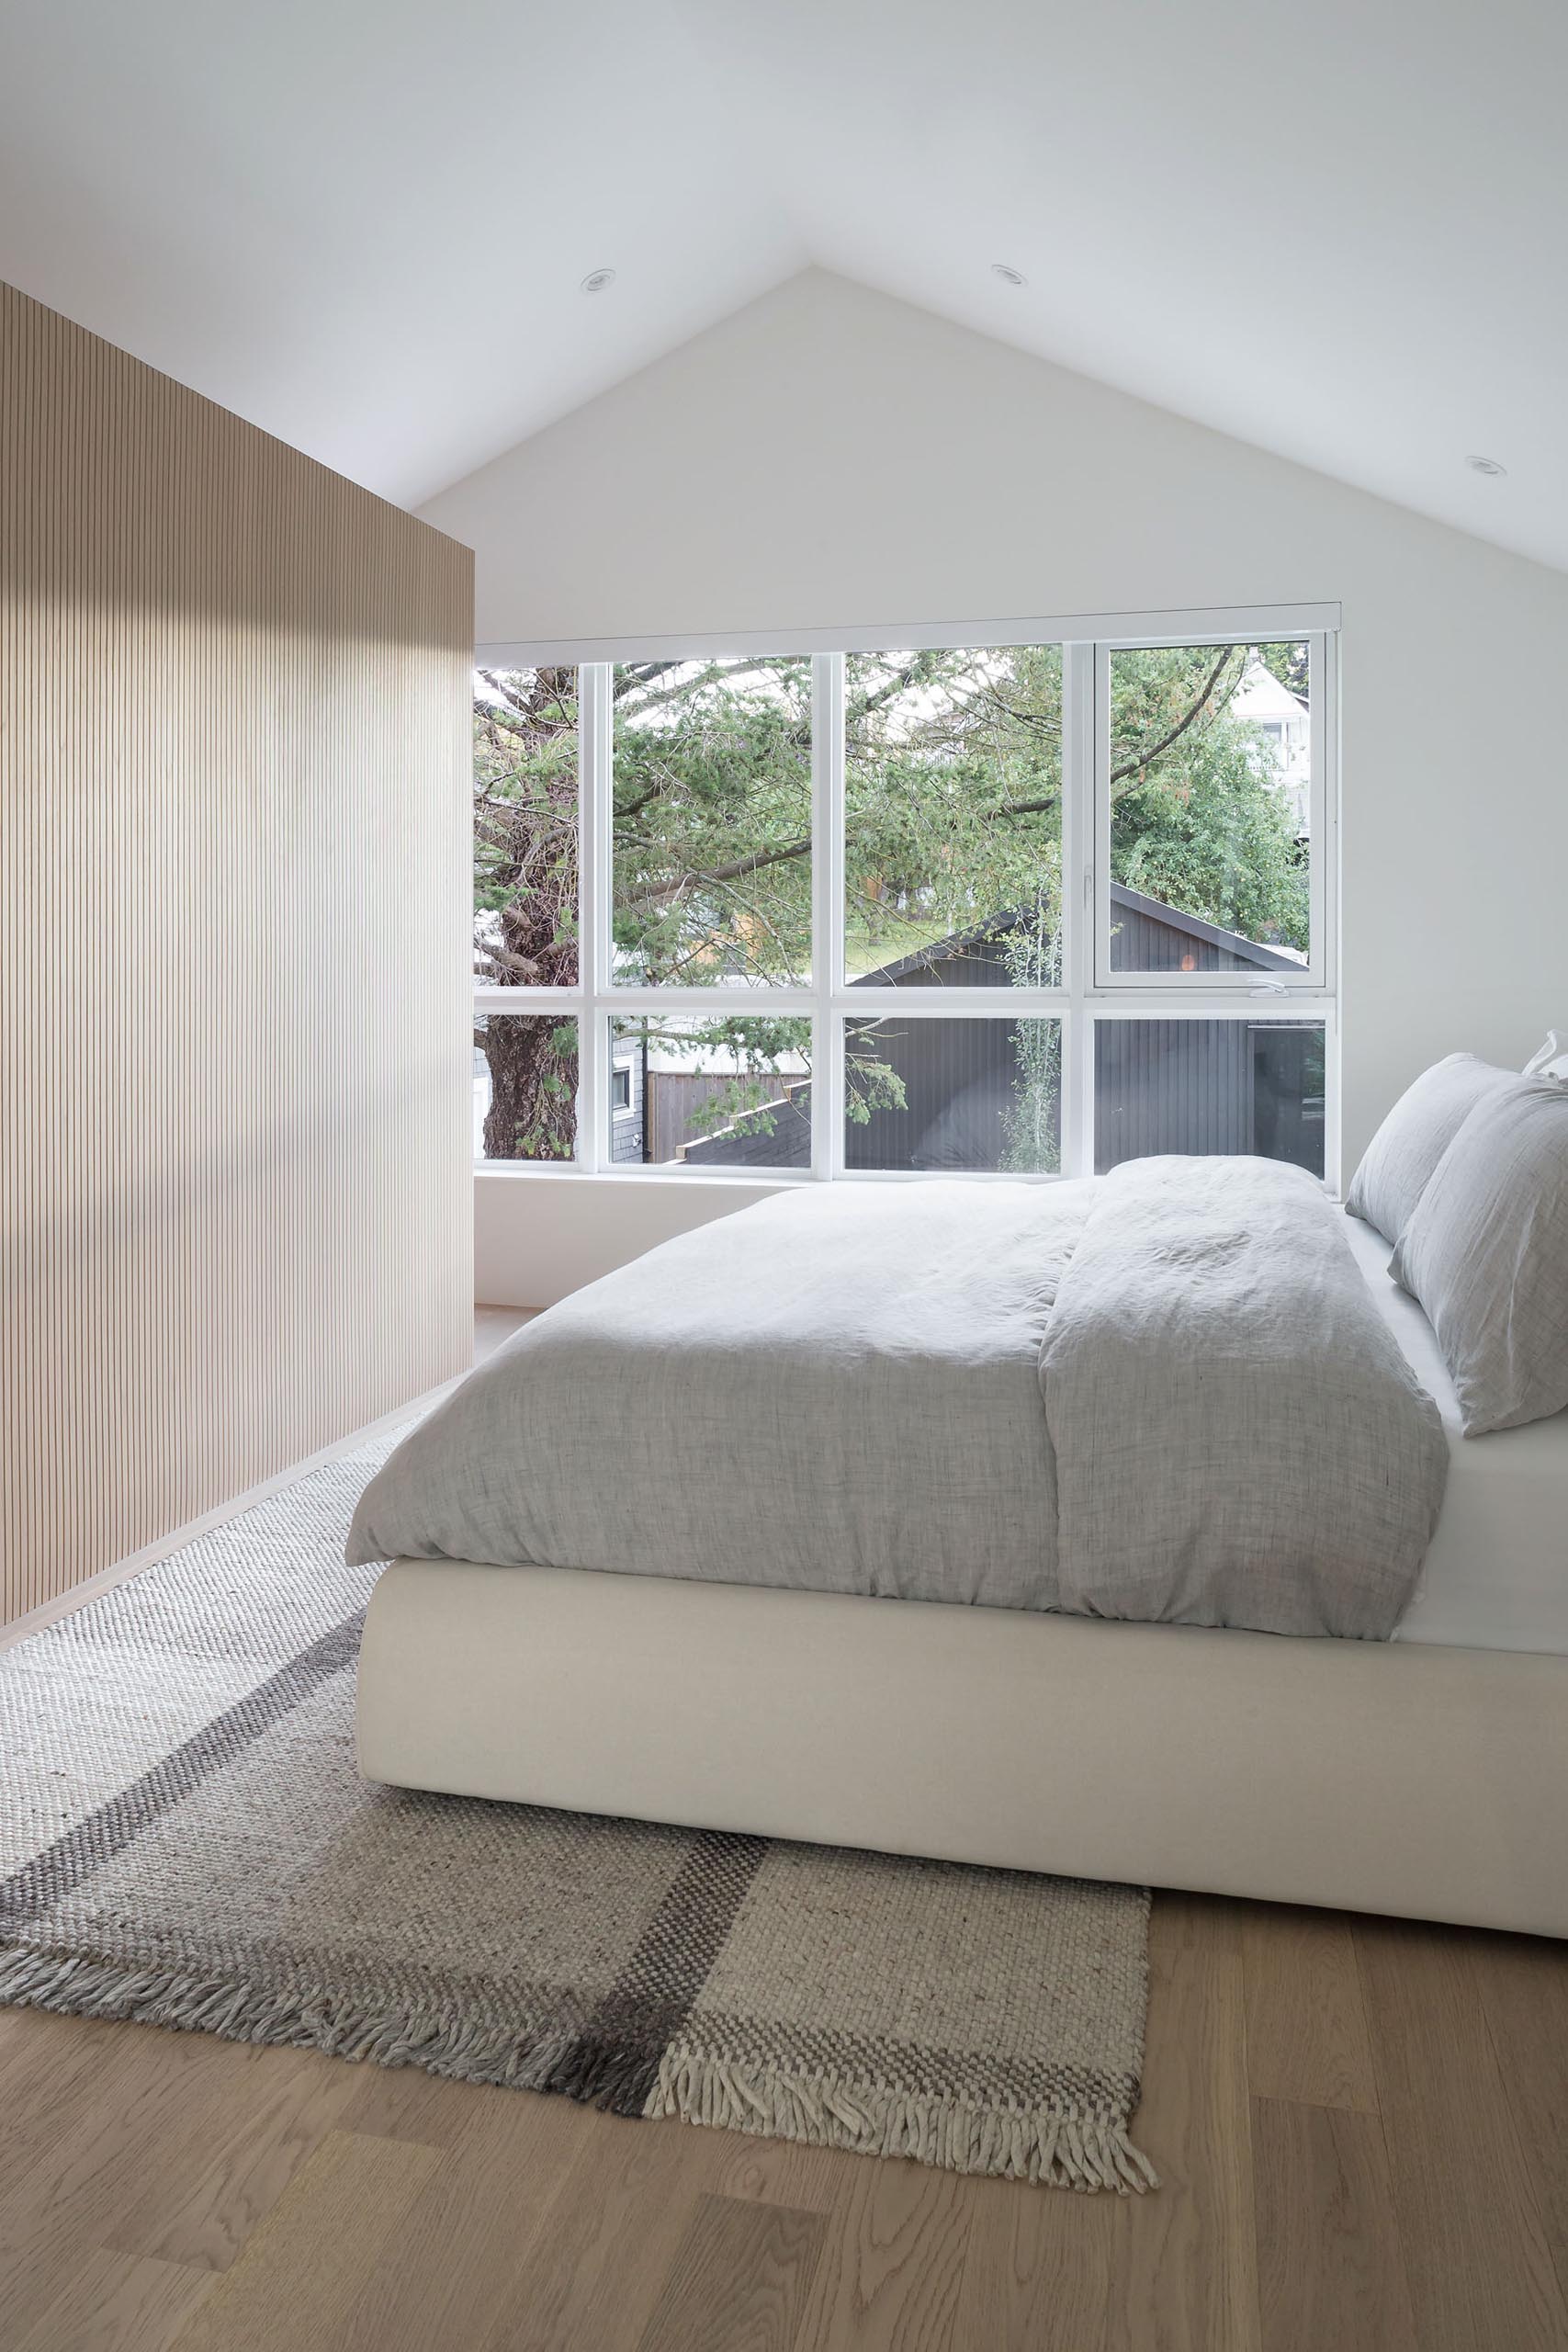 In this modern bedroom, the white walls and ceiling have been kept minimal, while a wood partition wall separates the closet from the sleeping area.